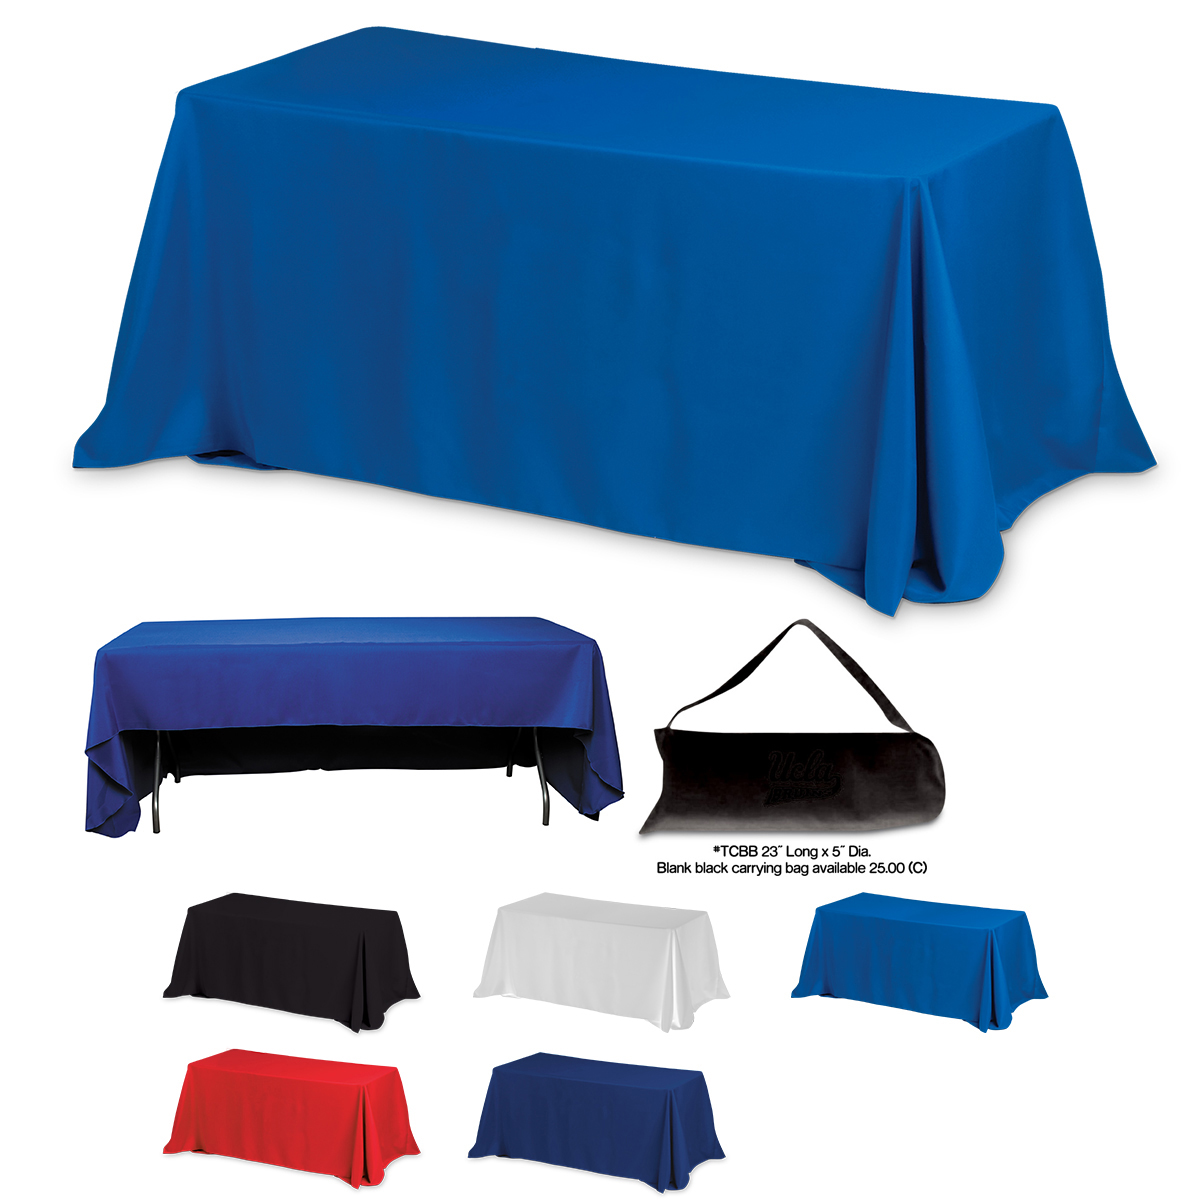 "Preakness Six" 3-Sided Economy Table Covers & Table Throws -Blanks / Fits 6 ft Table